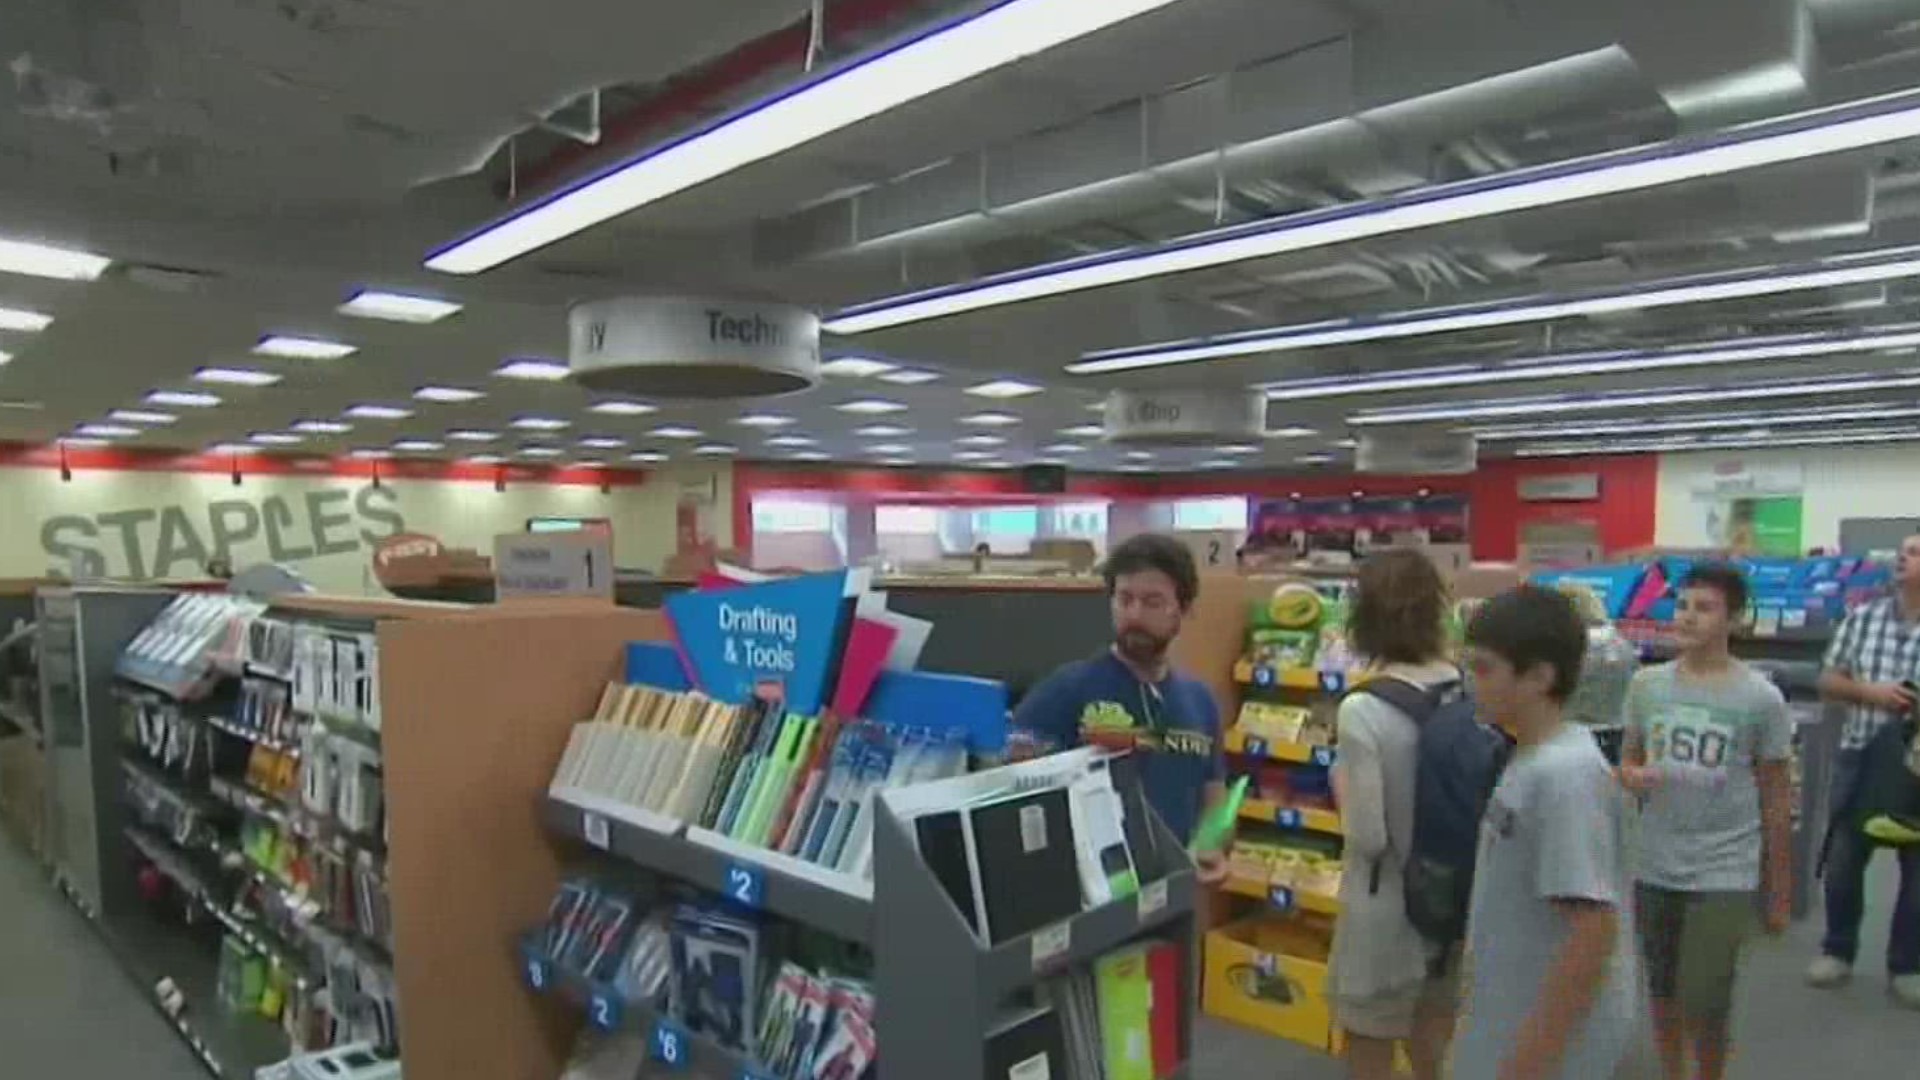 Teachers and parents struggle to find school supplies, but an educator attributes that to inflation.